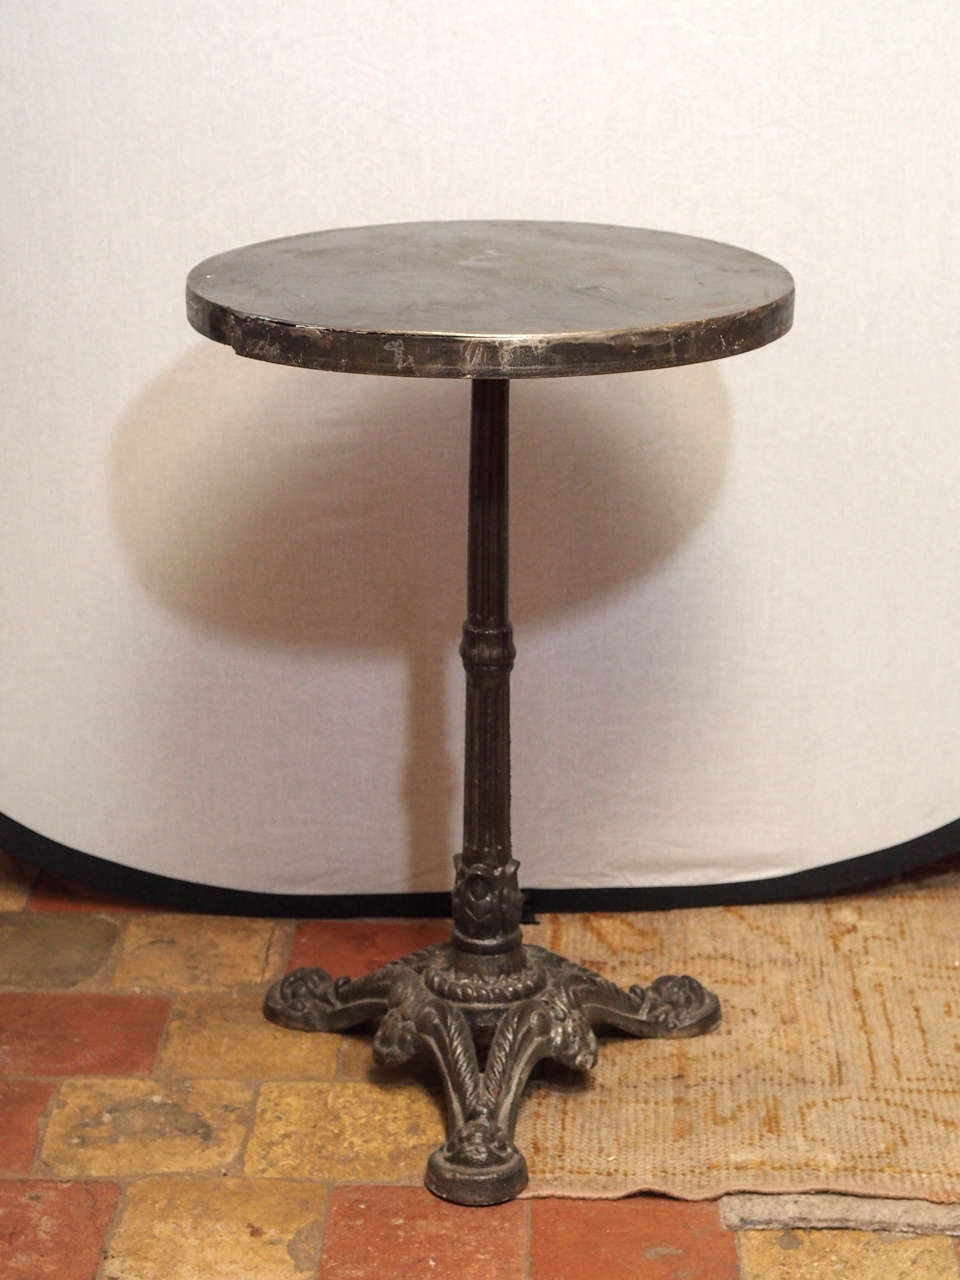 French round bistro table with a metal top and pedestal base.